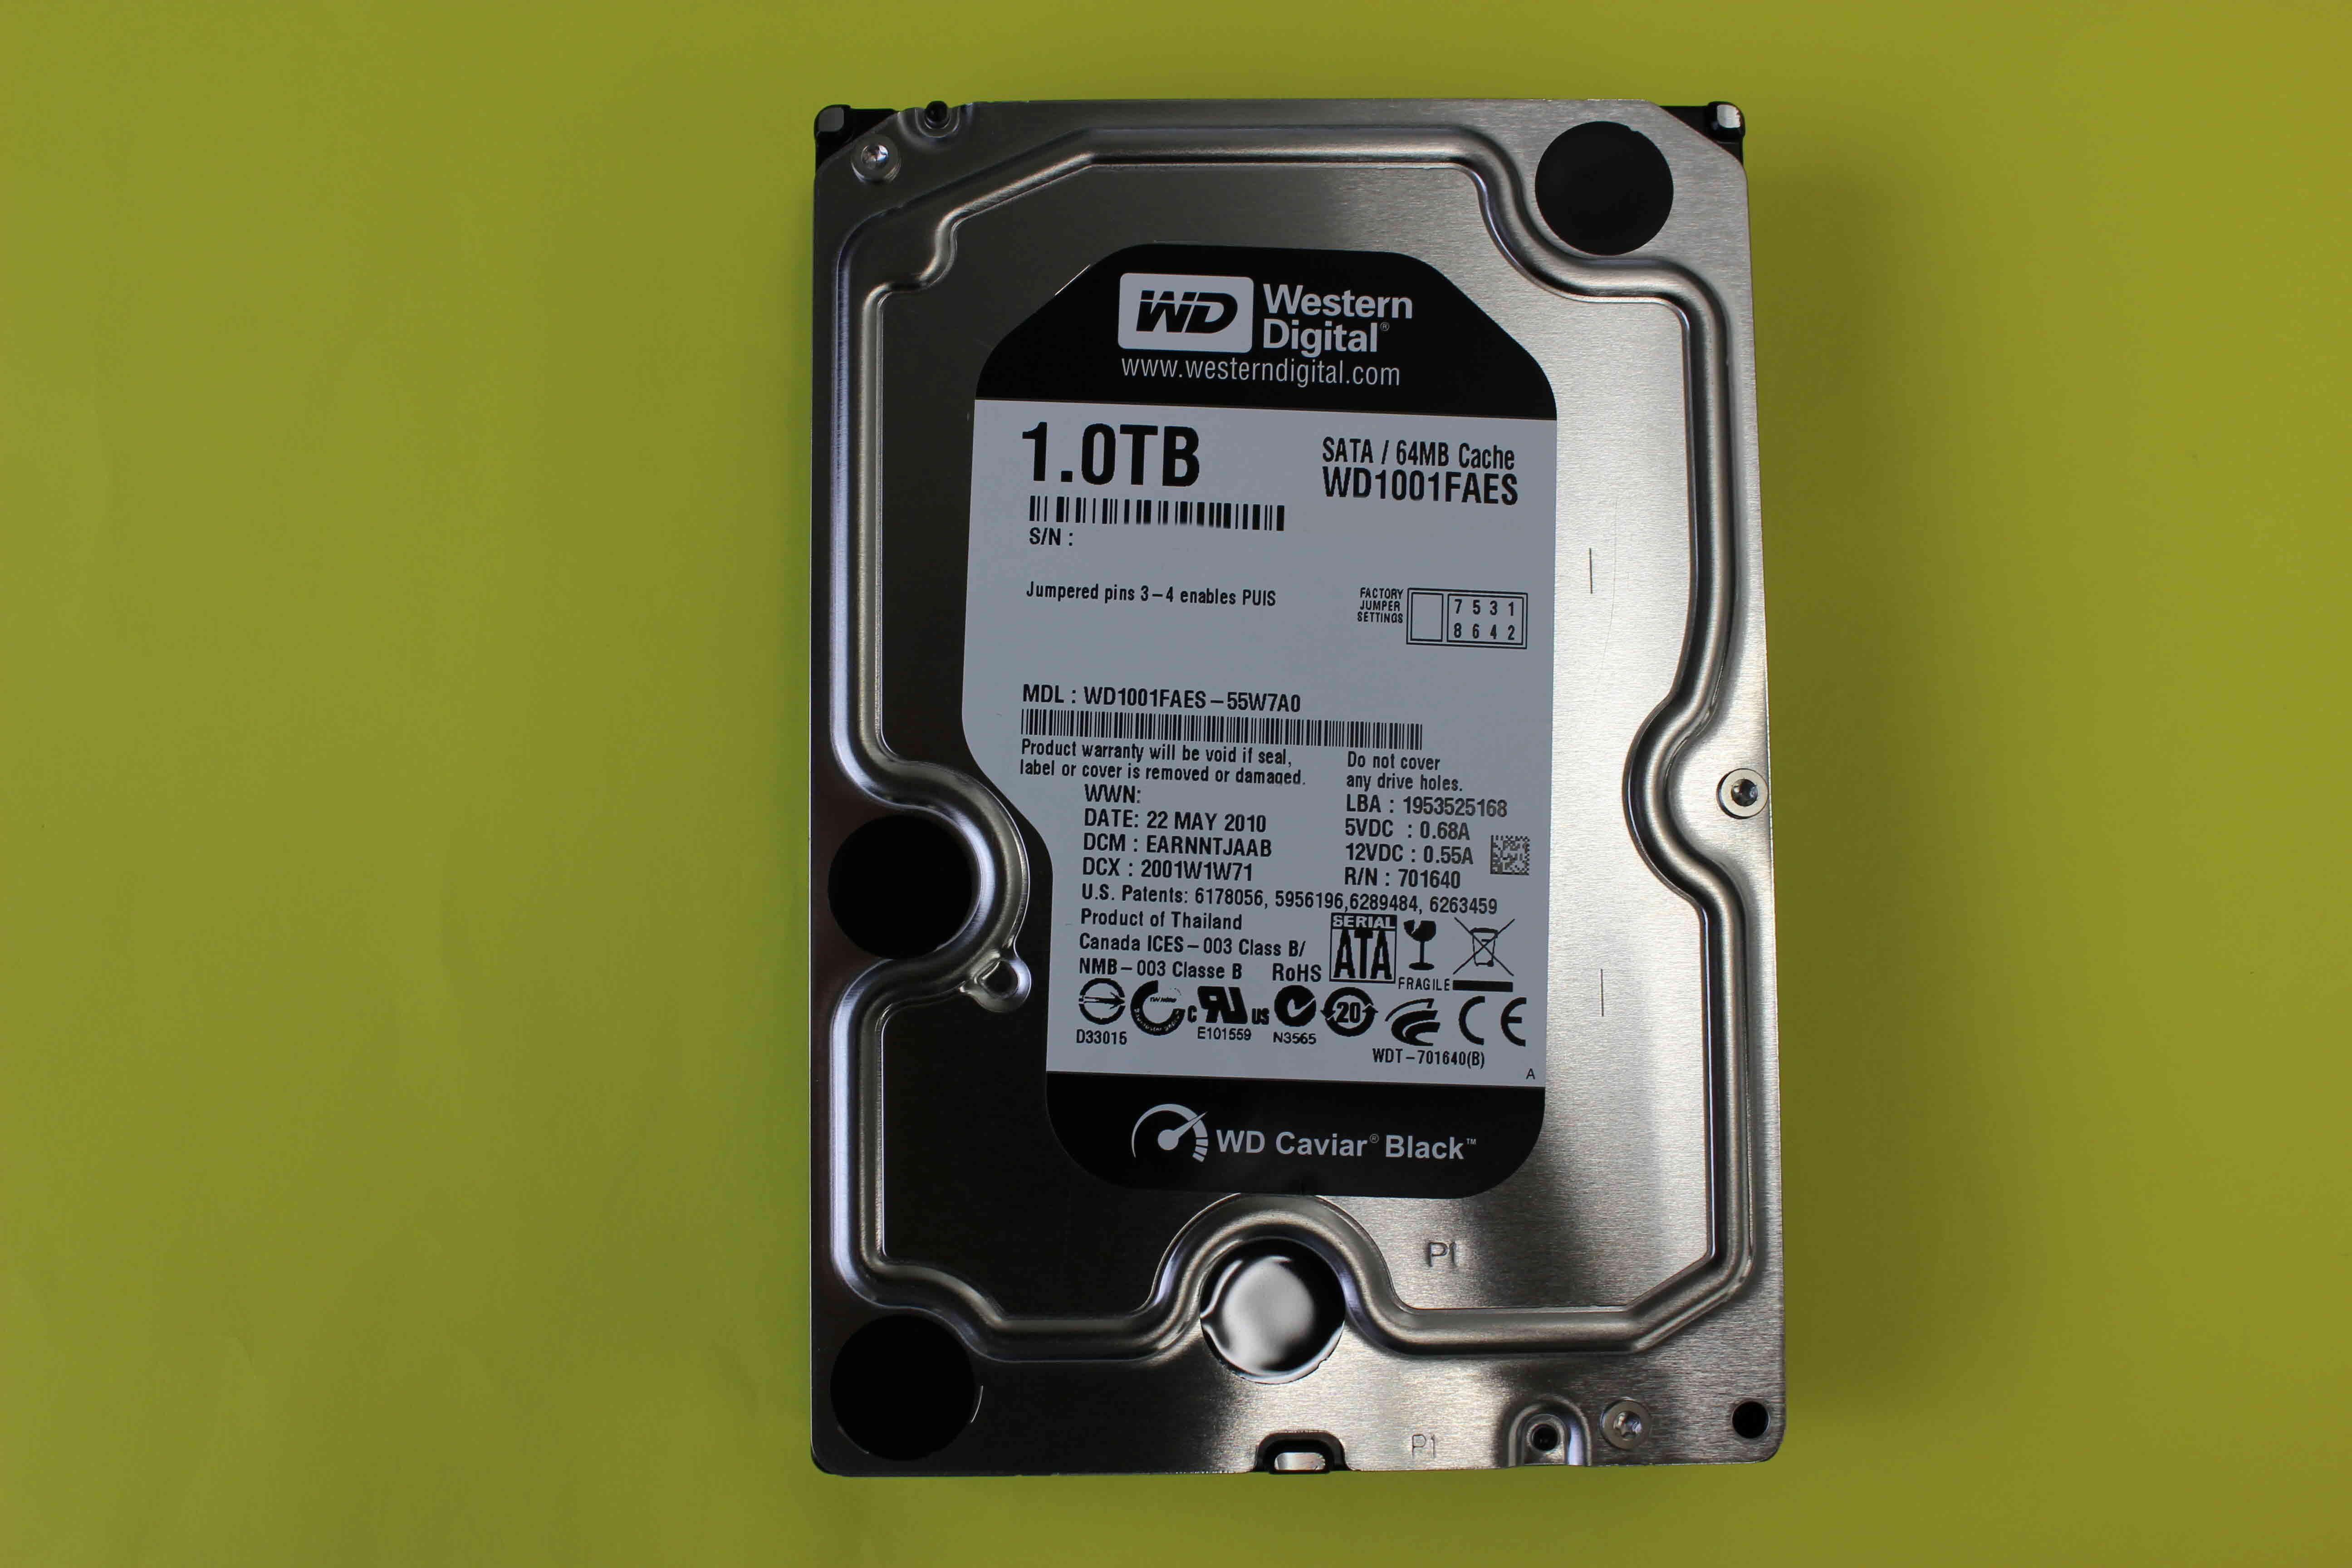 wd1001faes-55w7a0-recovery